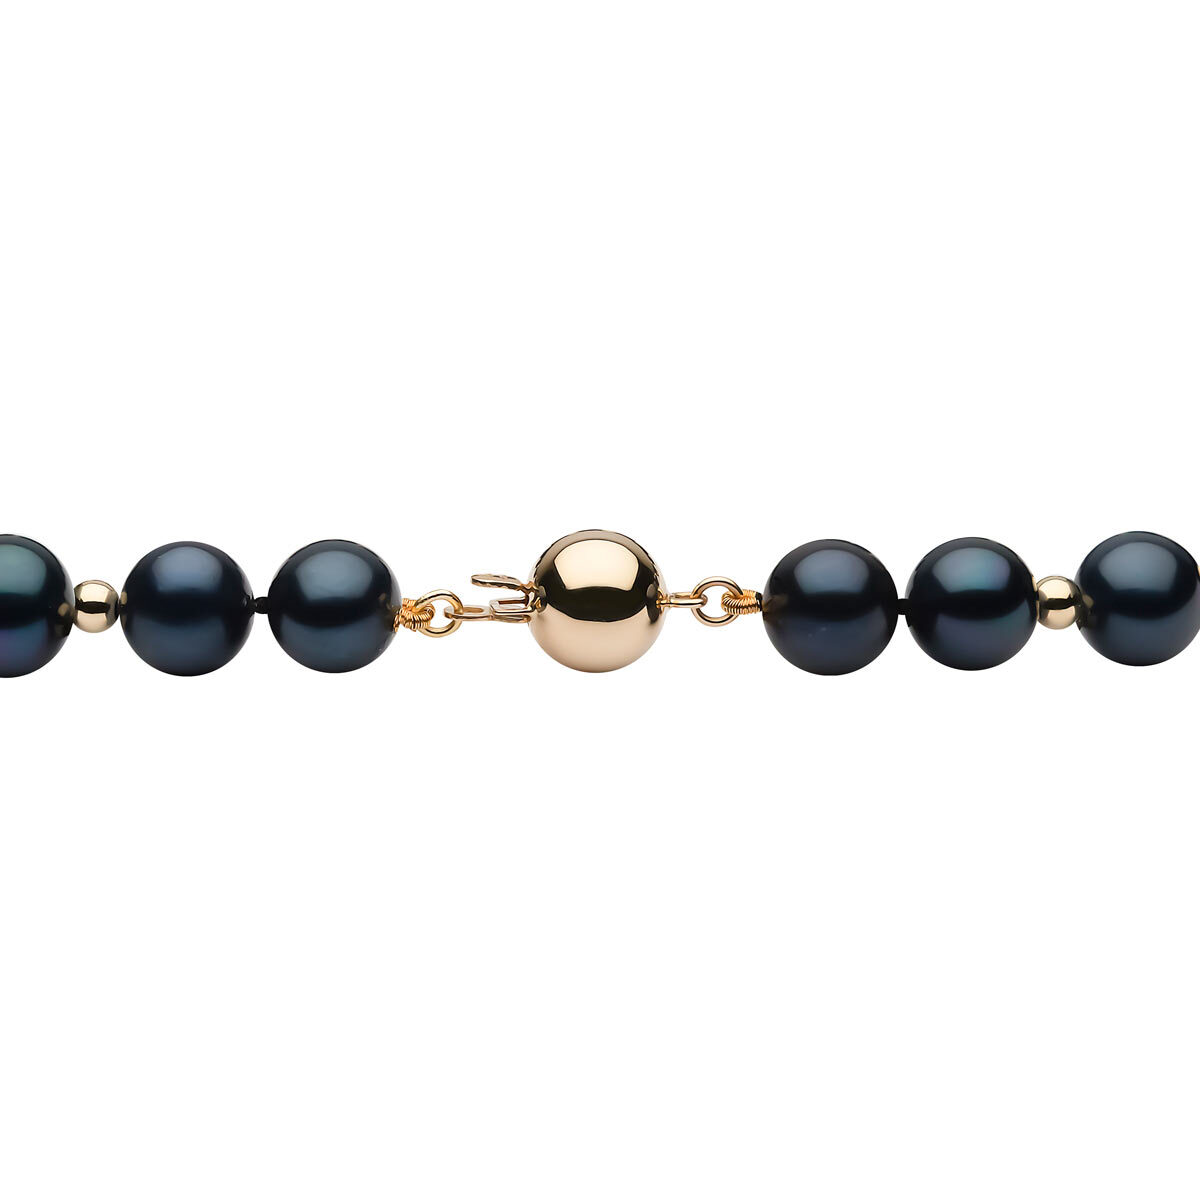 Black Pearl & Gold Bead Bracelet, 18ct Yellow Gold Clasp